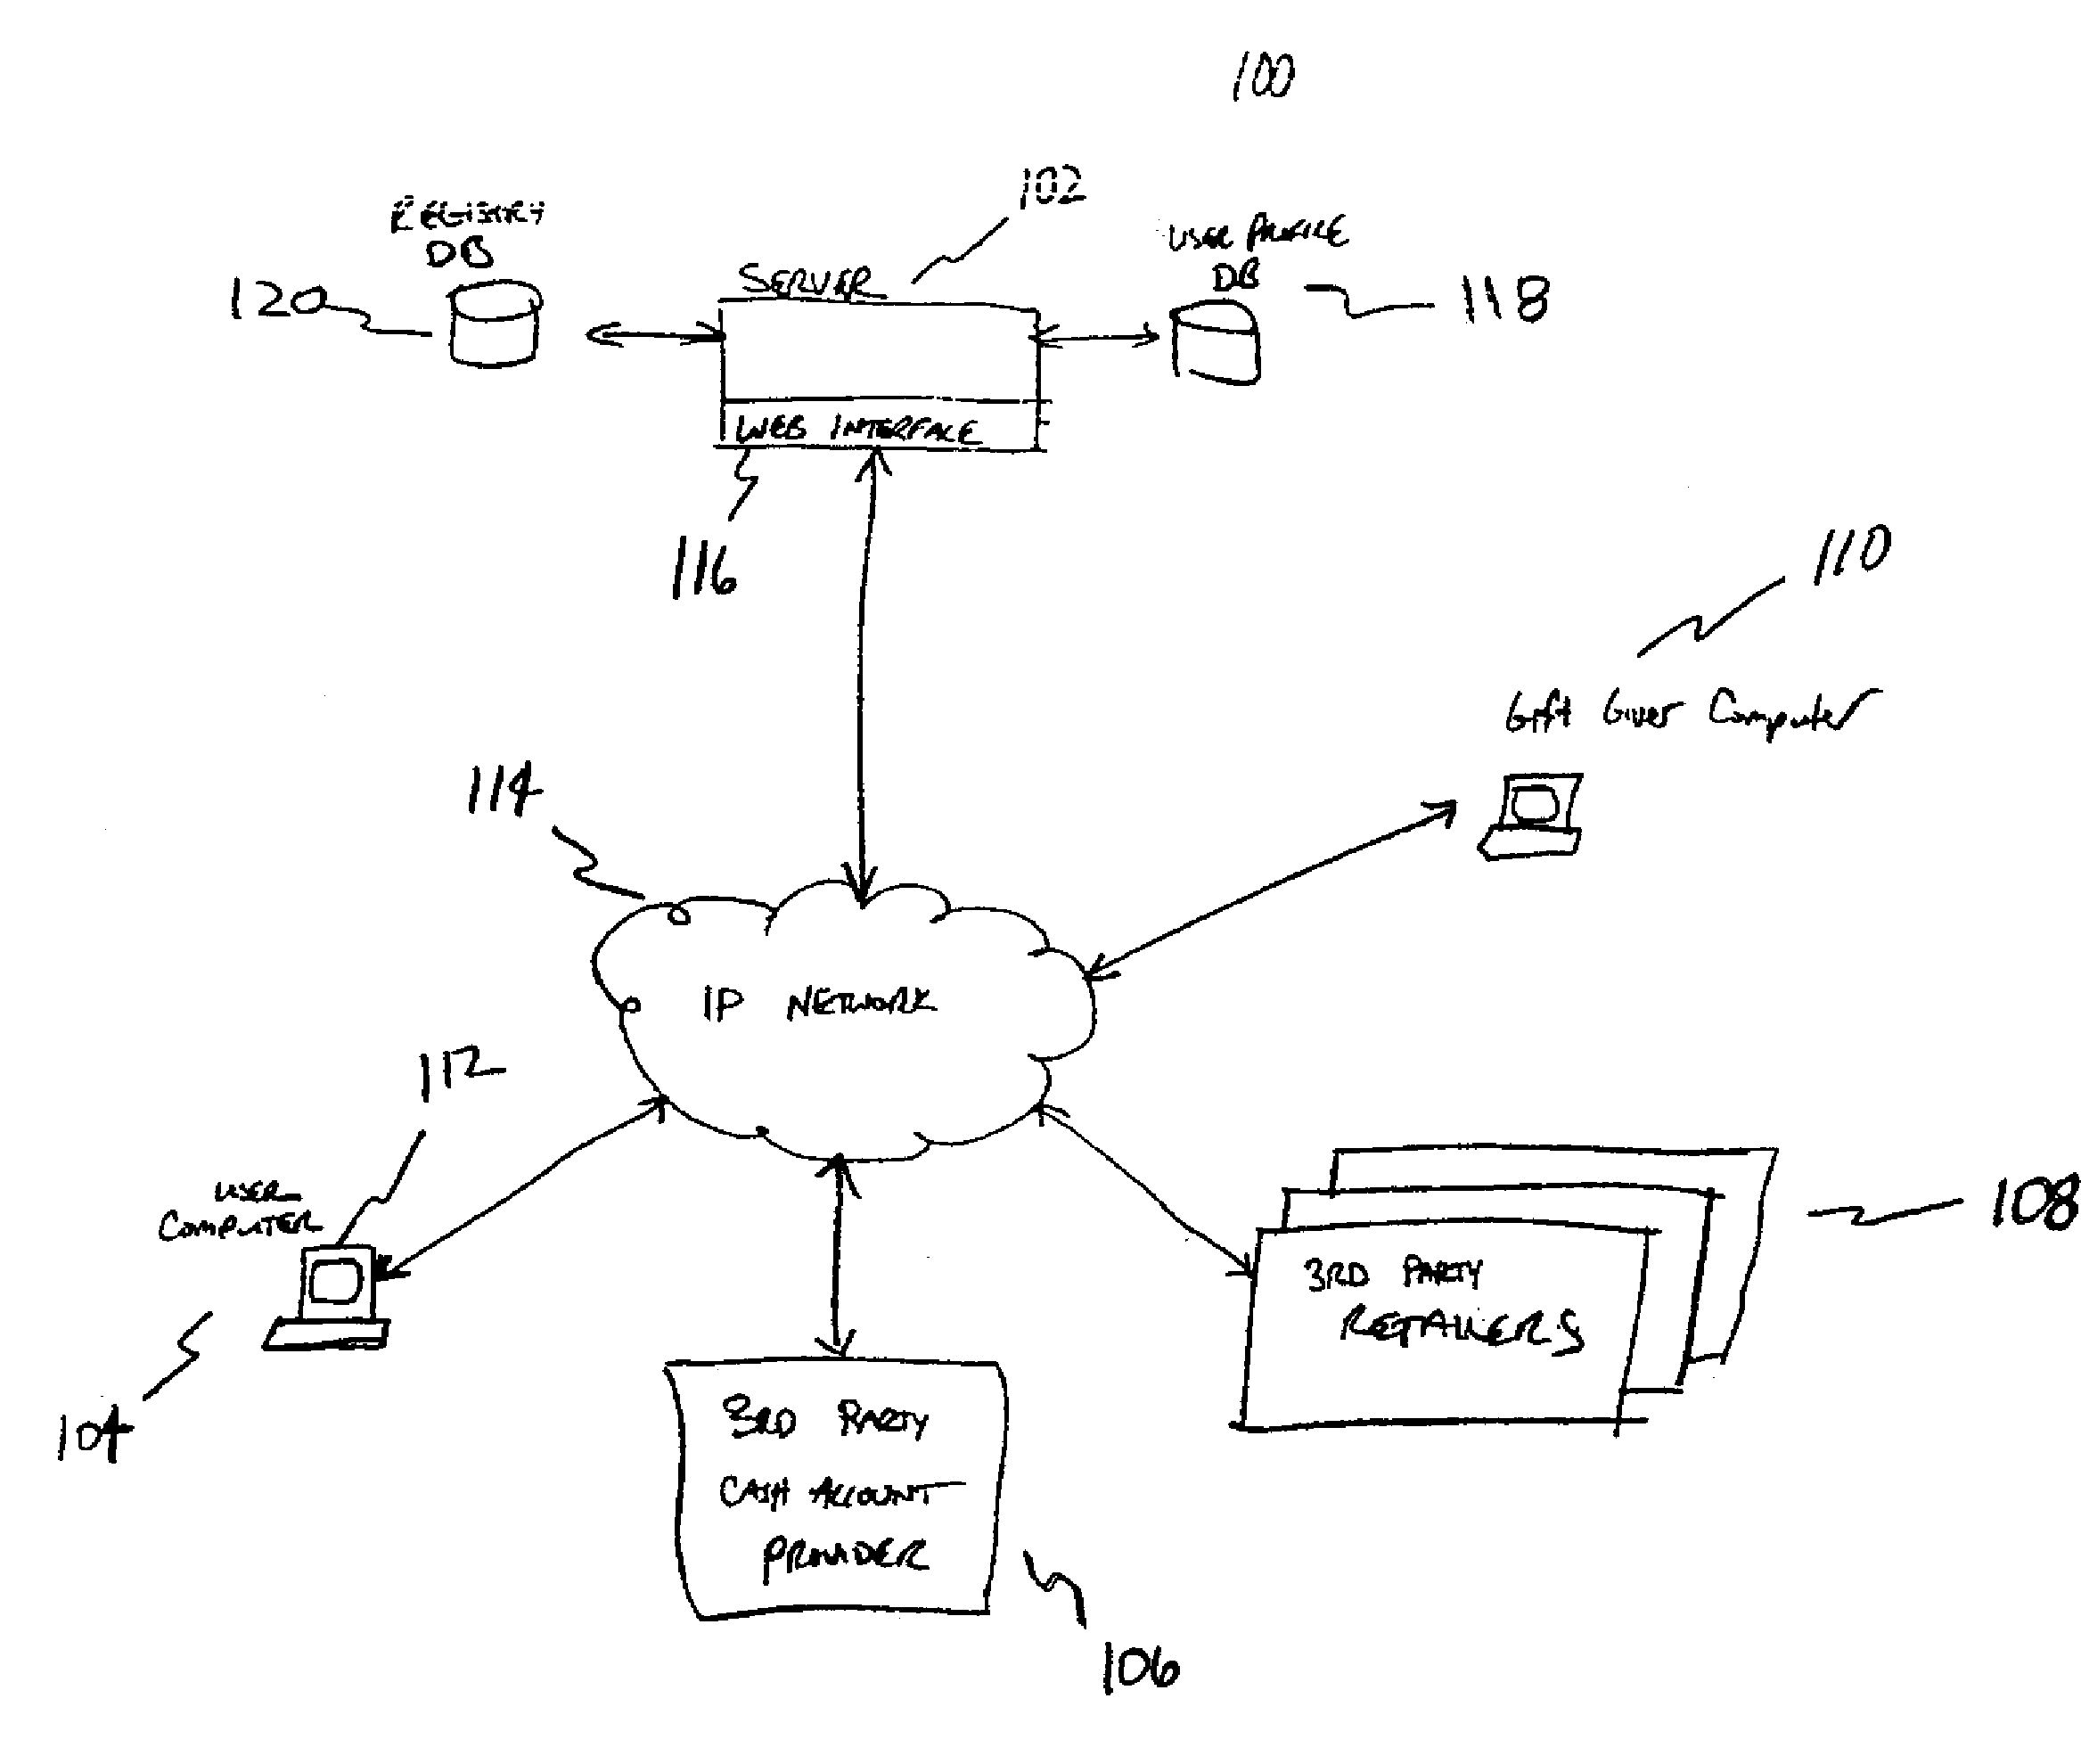 System and method for enabling cash gifts in an online registry